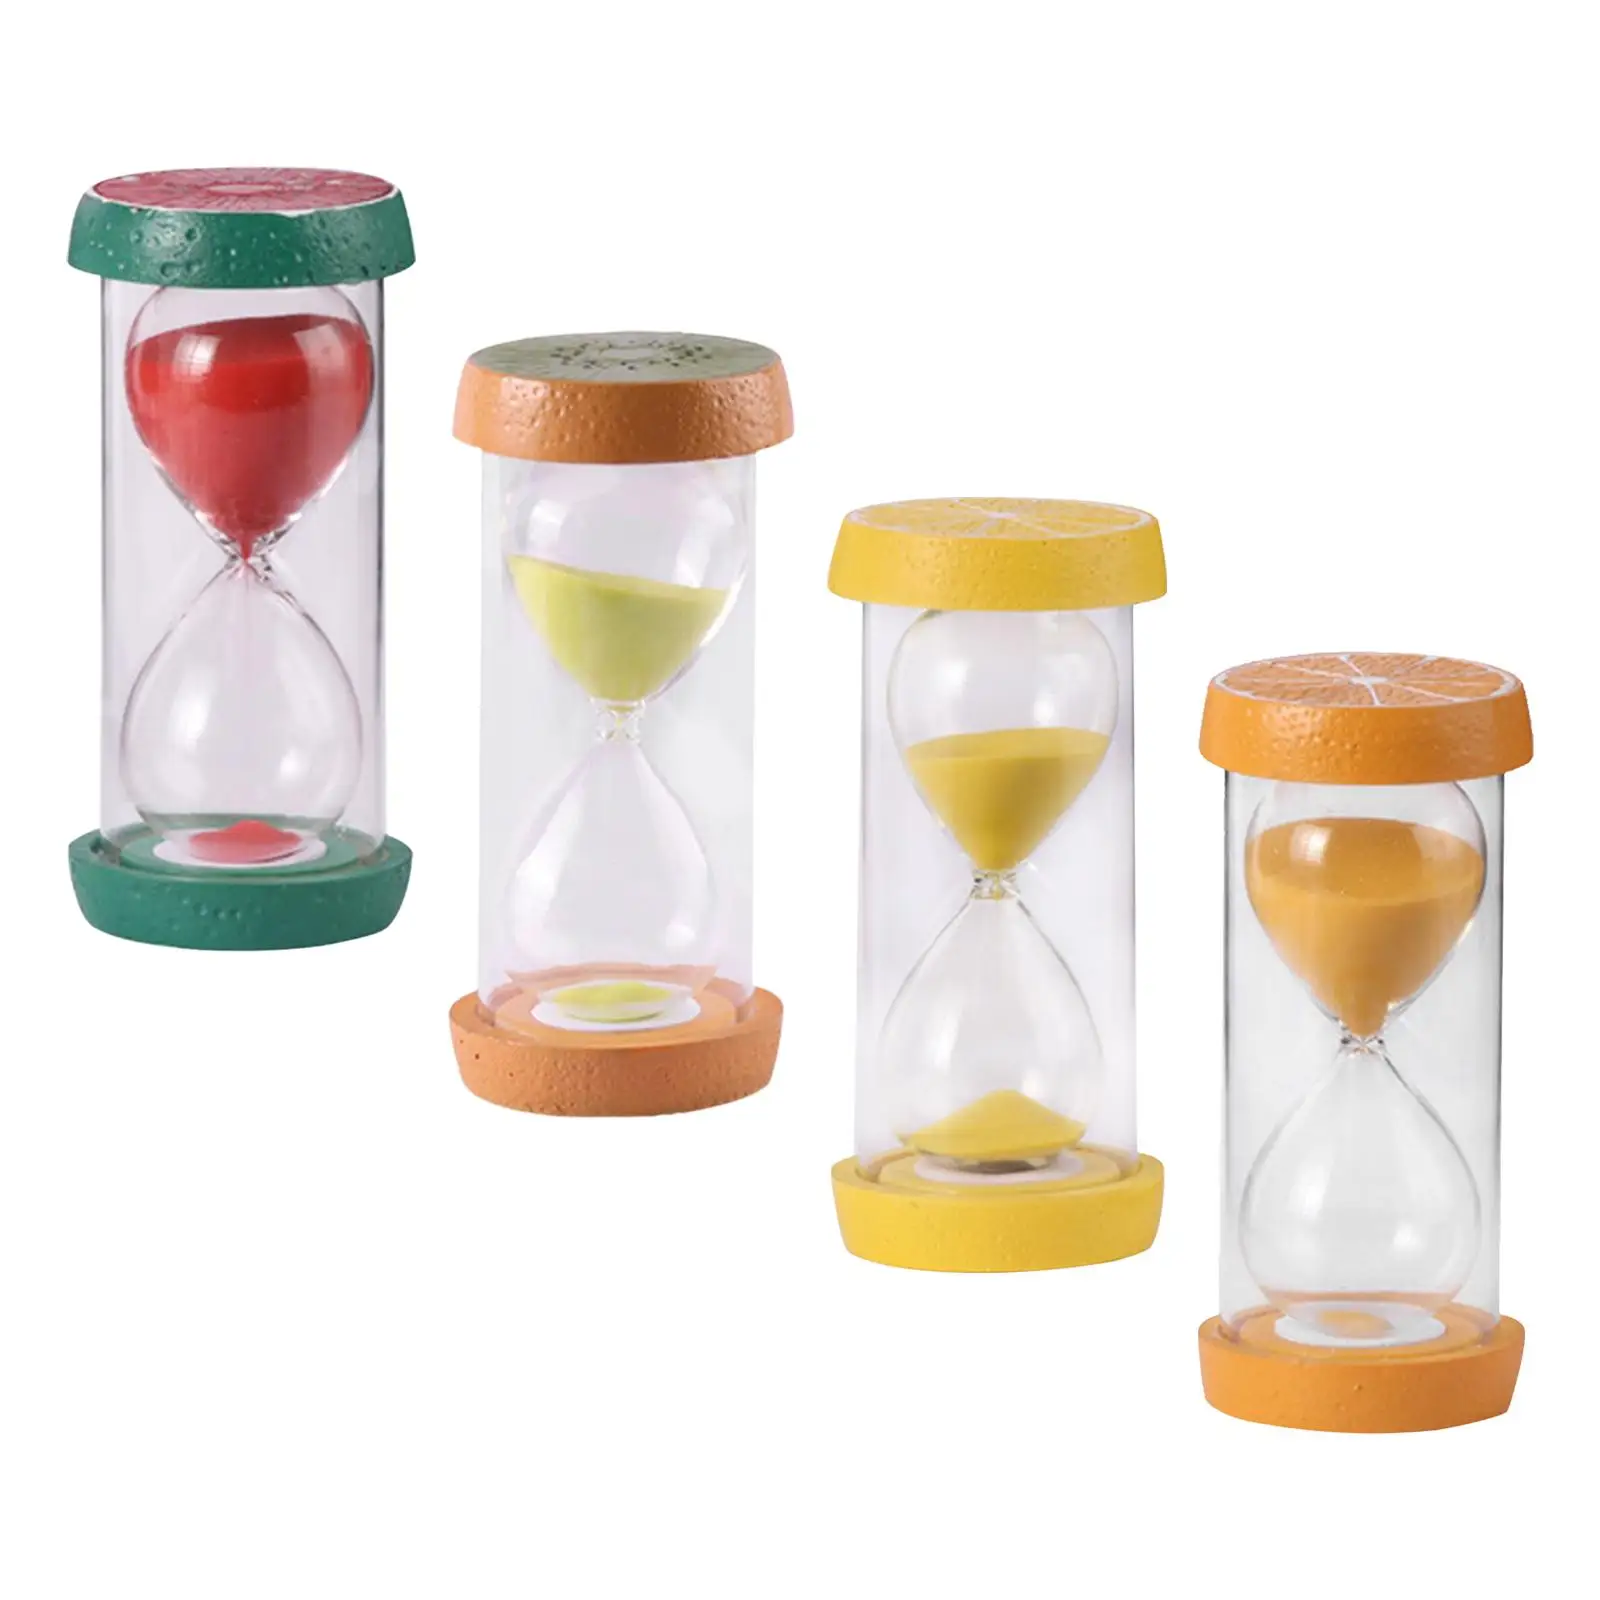 Classroom Timer drop resistant Toothbrush Timer Home Office Decoration Fruit Hourglass for Games toy Gift Studying Office